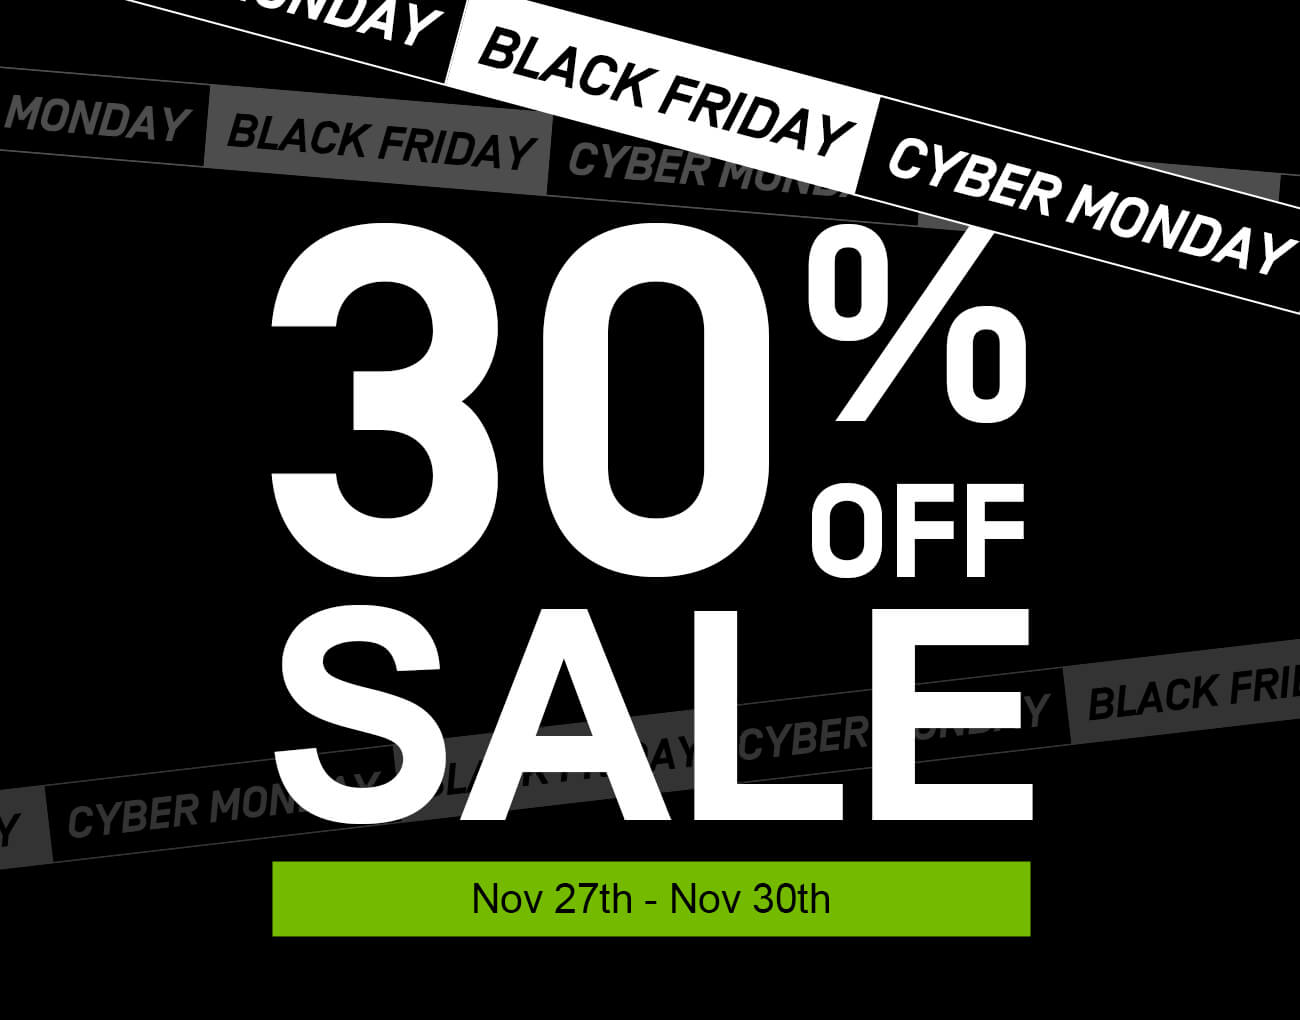 IPEVO Black Friday Cyber Monday Sale,30% off on selected products,Nov 27th to Nov 30th